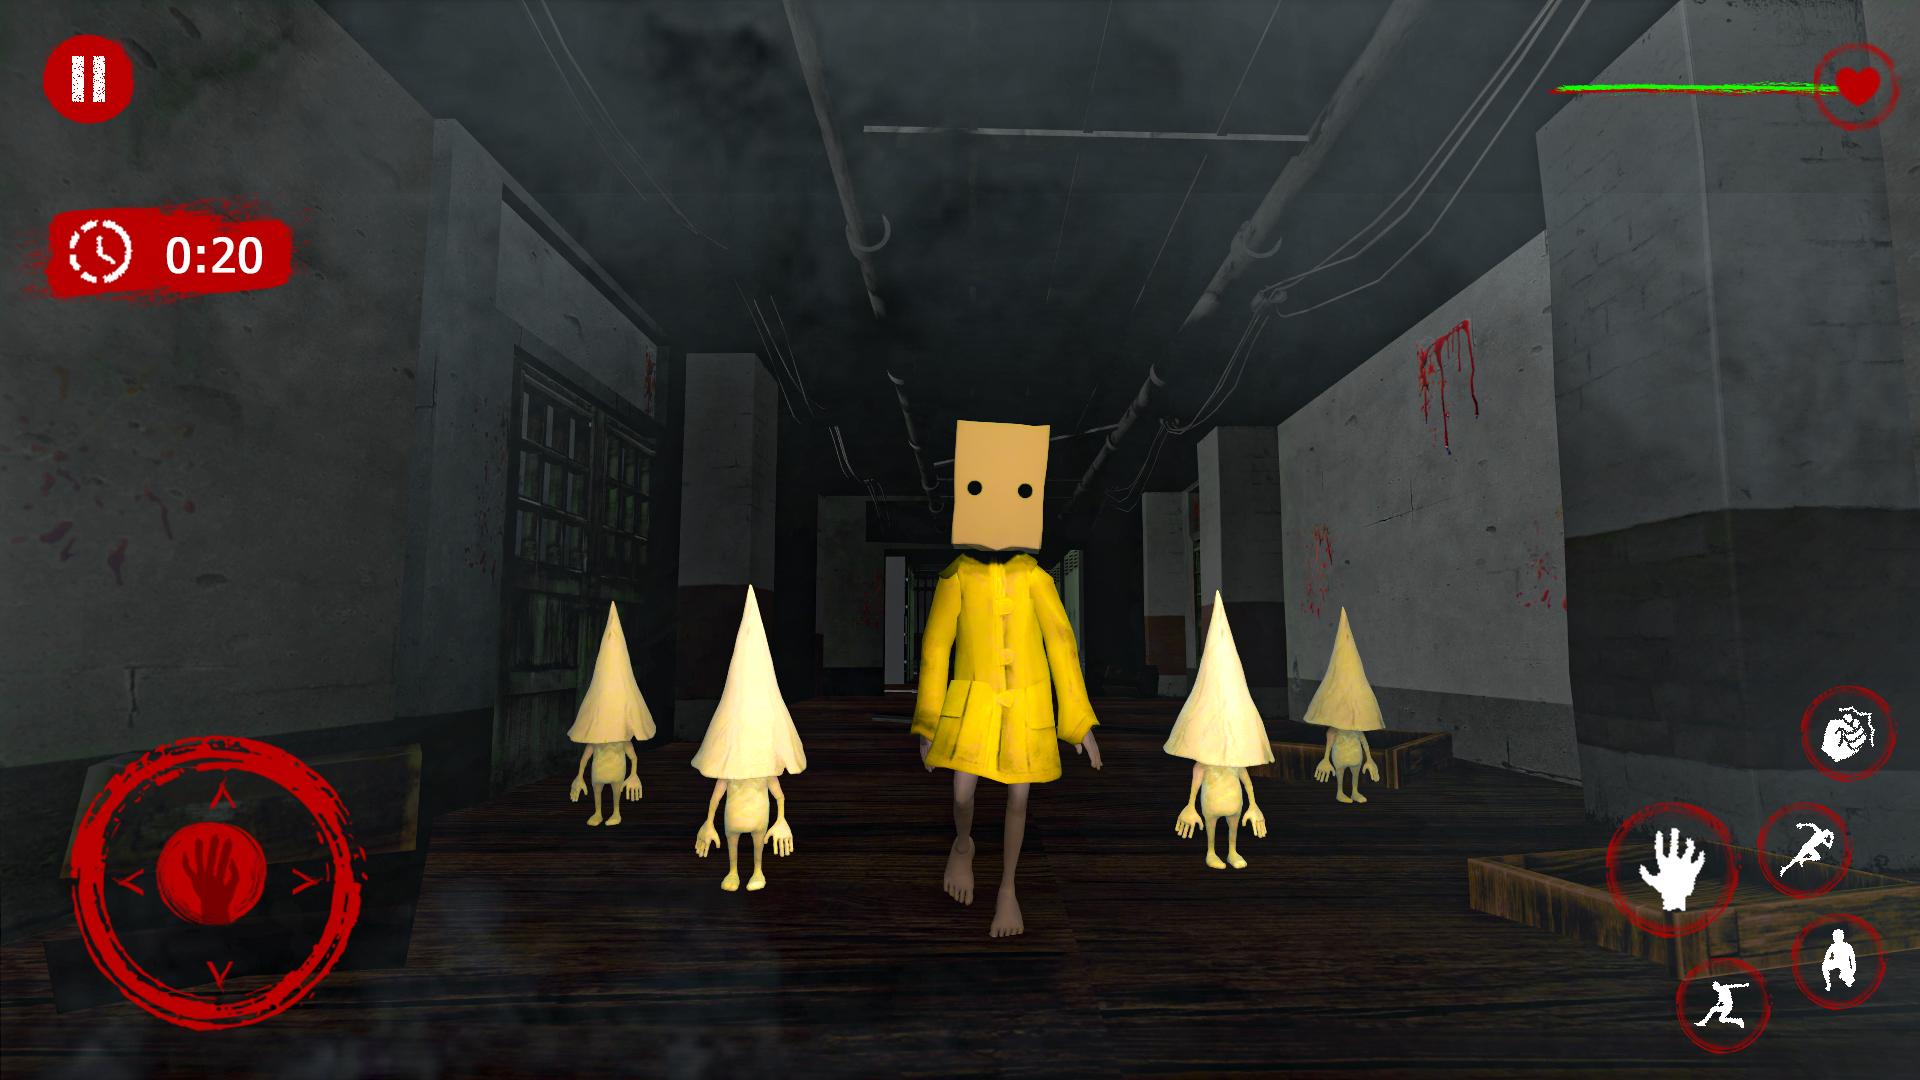 Little Scary Nightmares 2 - Haunted House Escape 0.1 Screenshot 3